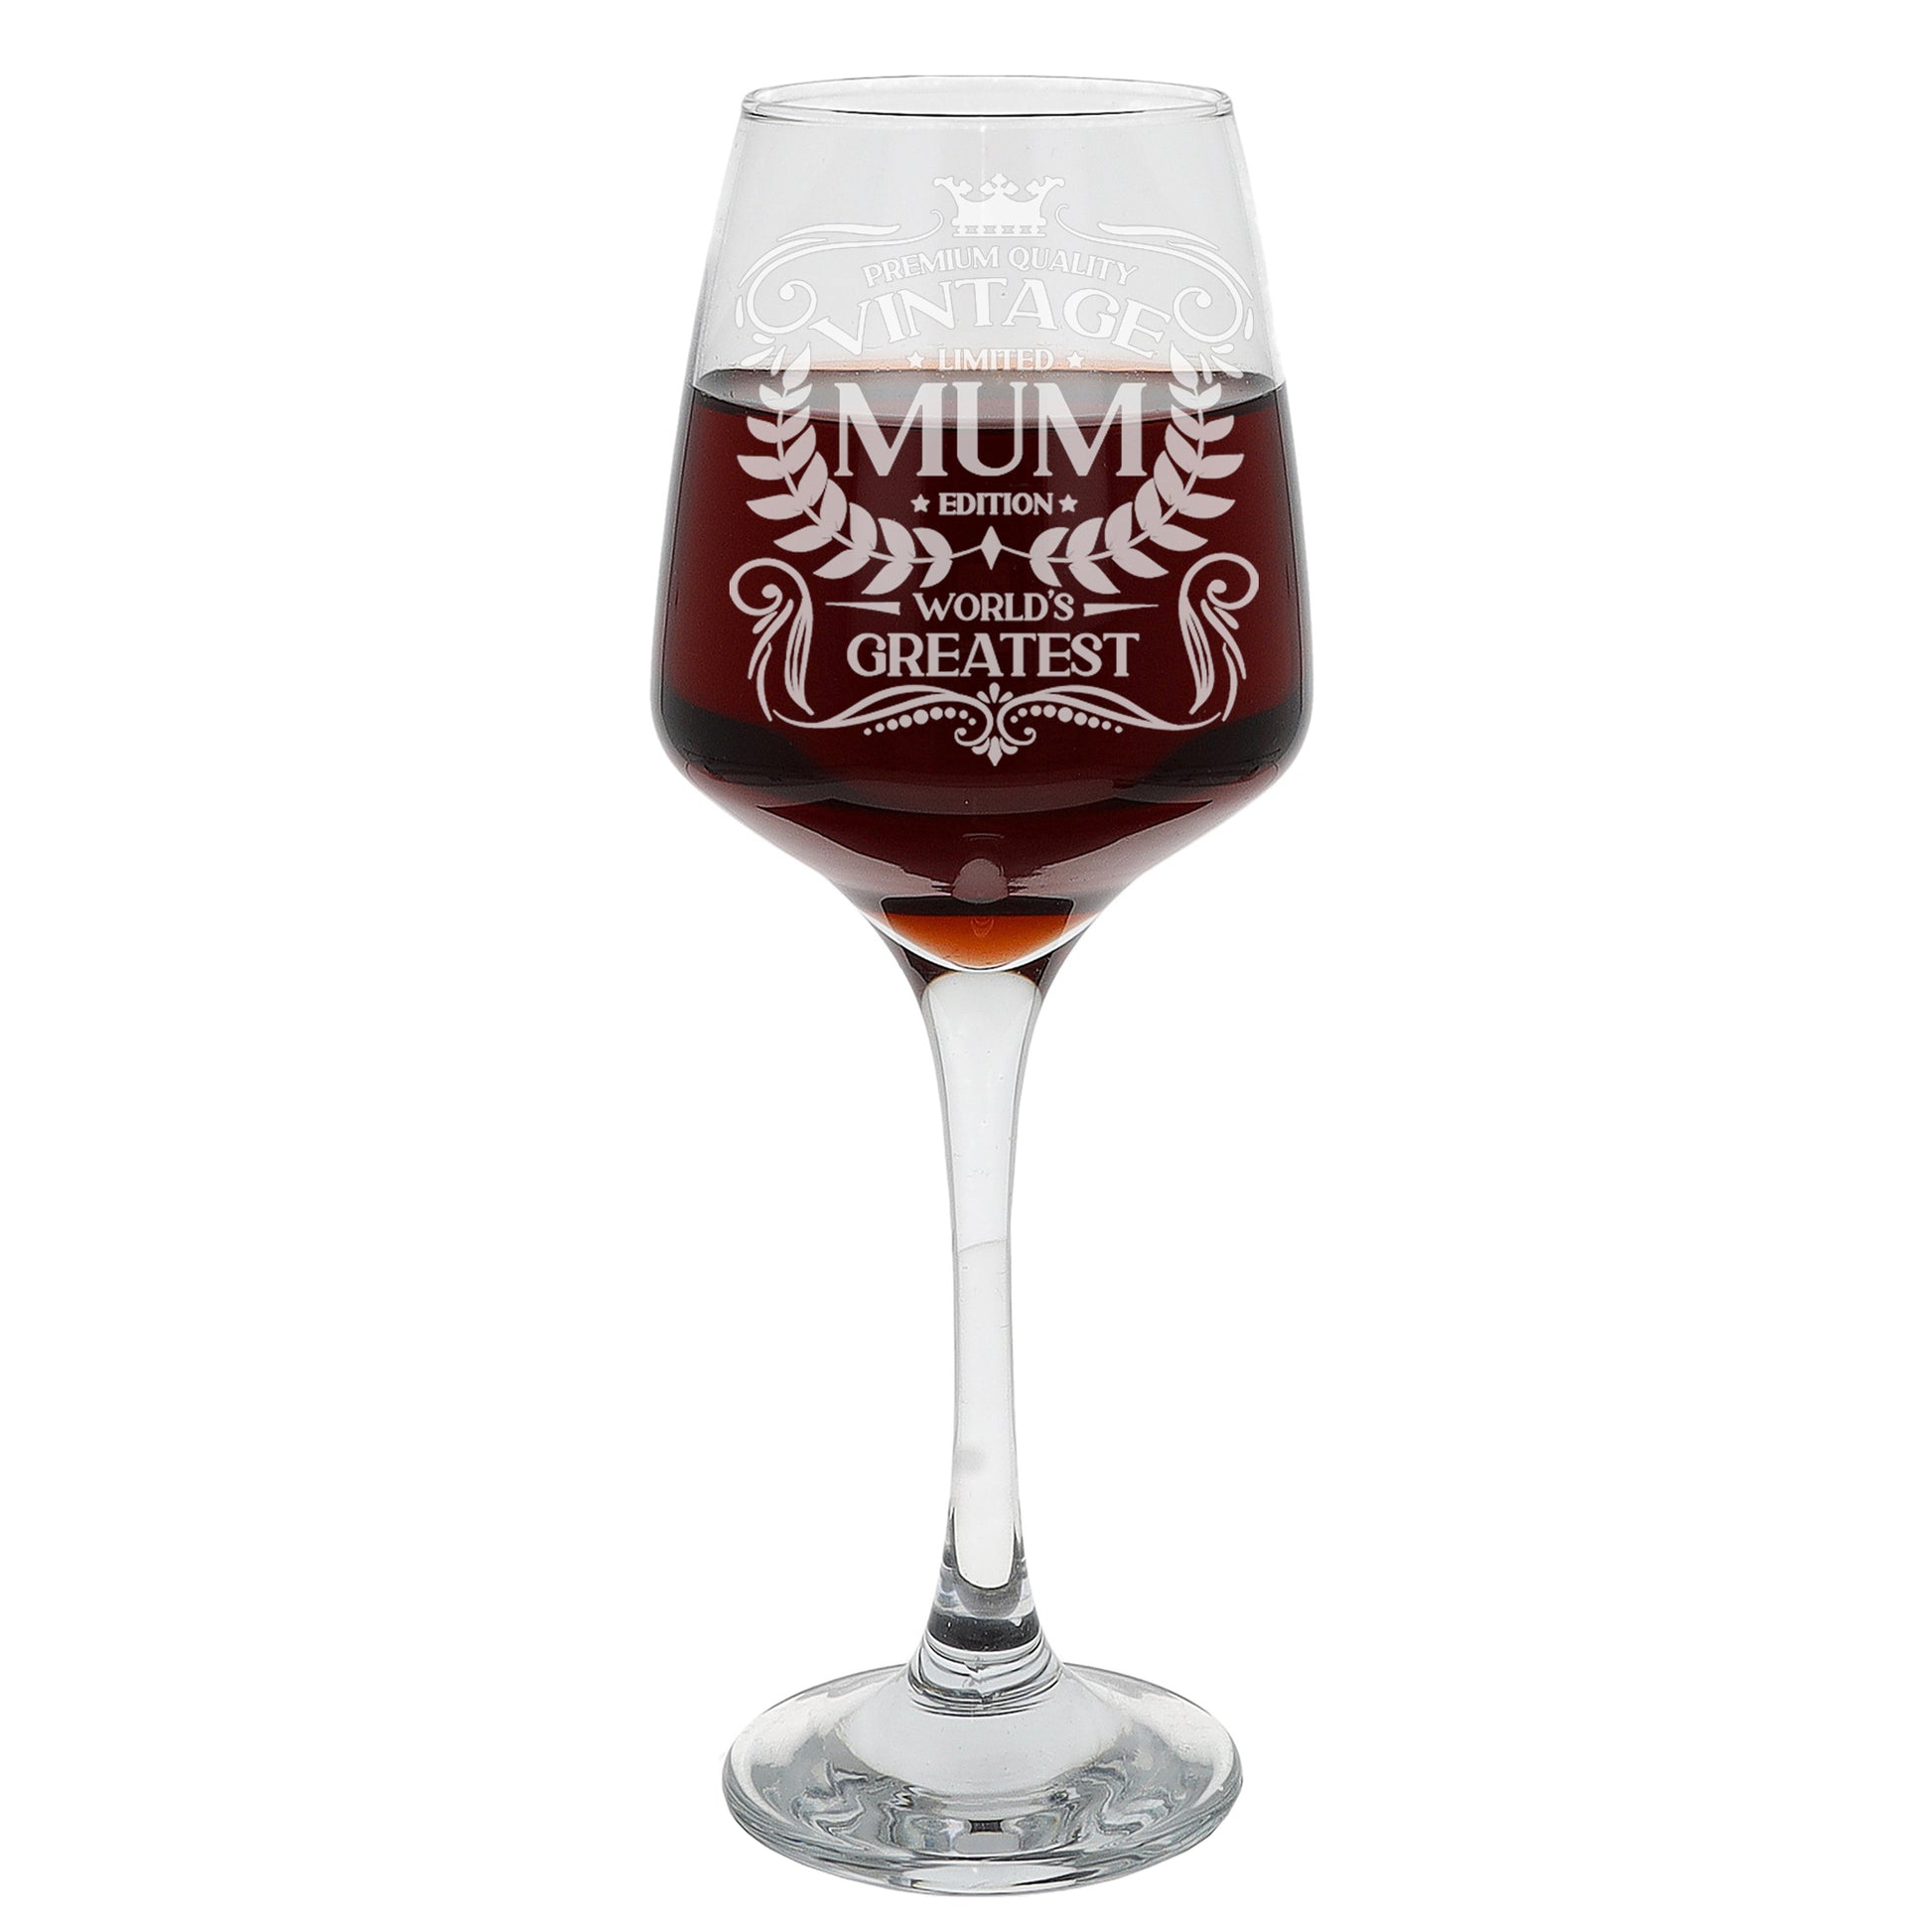 Vintage World's Greatest Mum Engraved Wine Glass Gift  - Always Looking Good - Wine Glass Only  